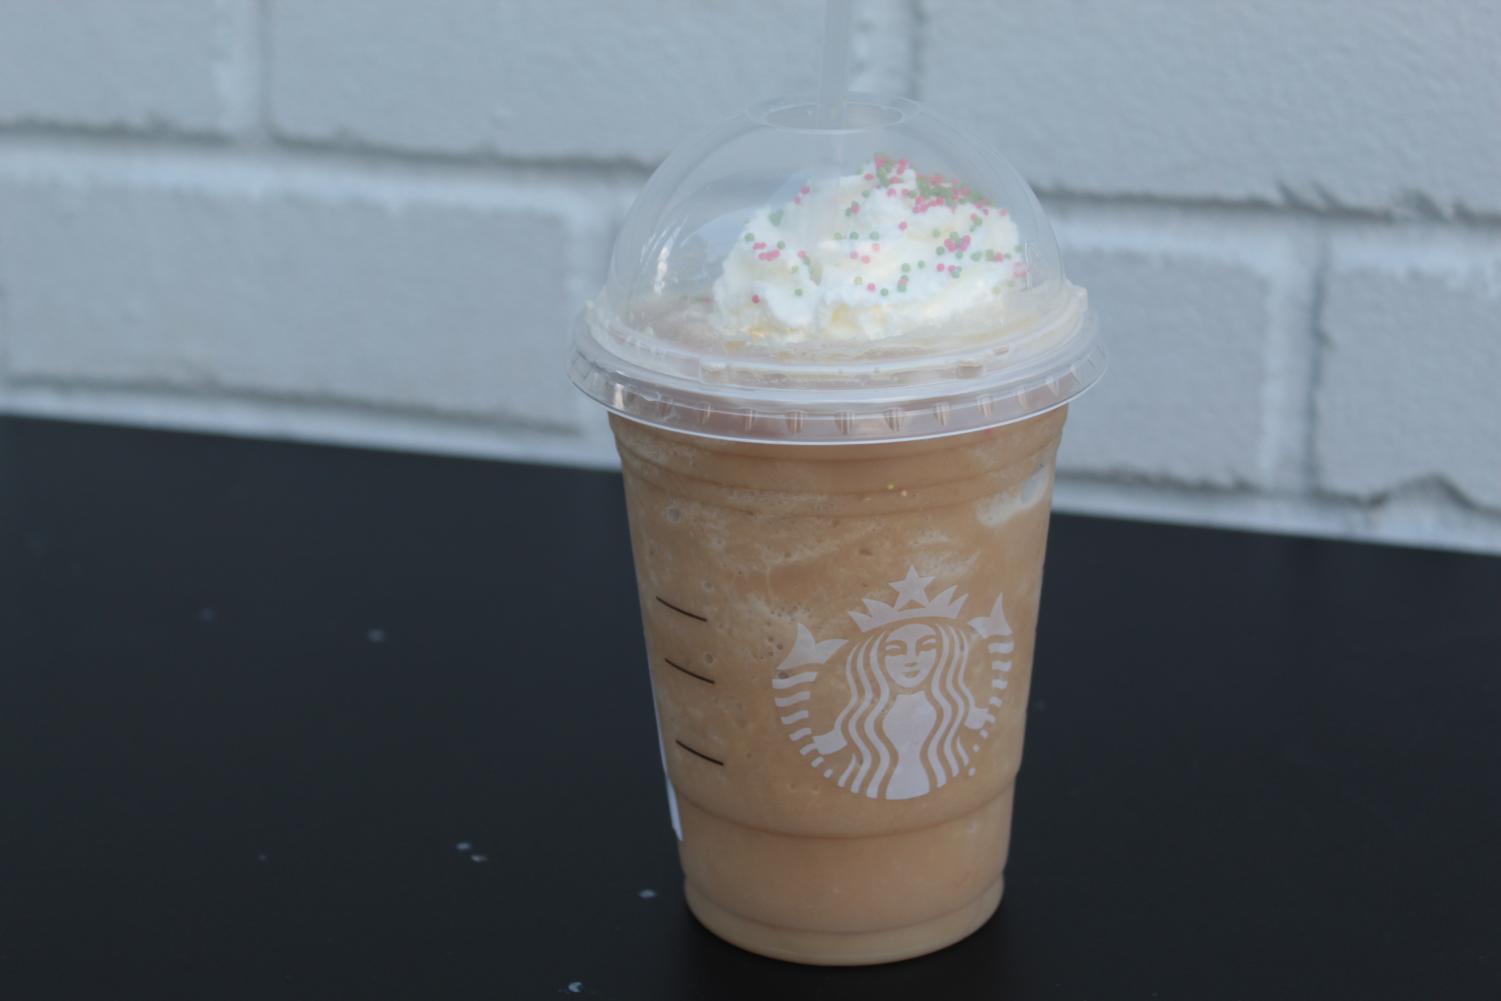 REVIEW: Starbucks Holiday Cold Foams (Peppermint Chocolate, Chestnut  Praline, Sugar Cookie, and Caramel Brulee) - The Impulsive Buy